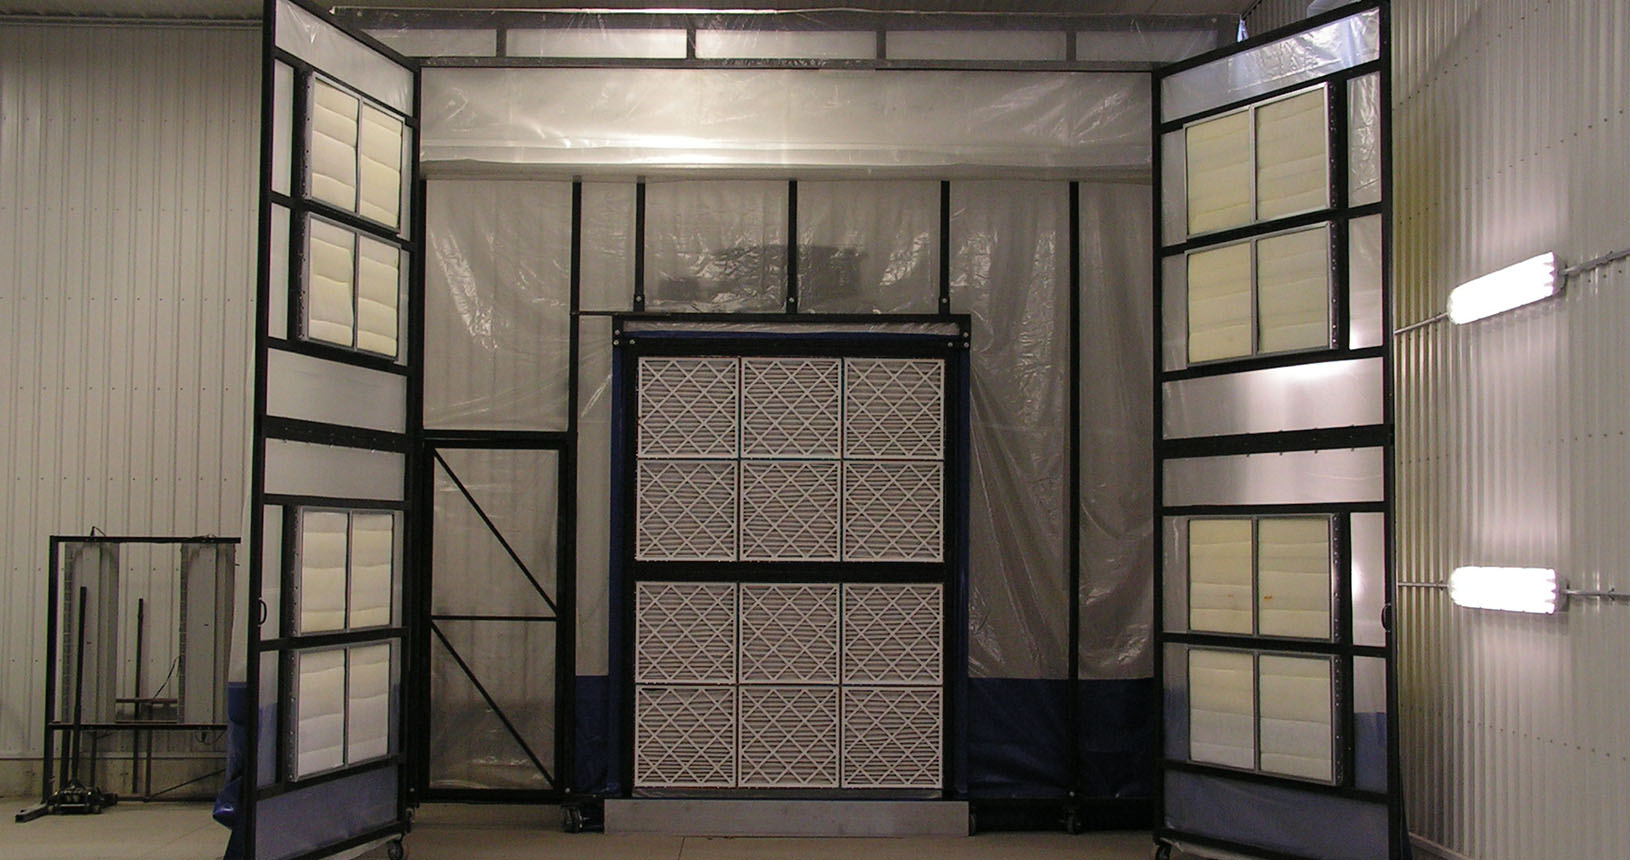 Retractable Booth showing filters